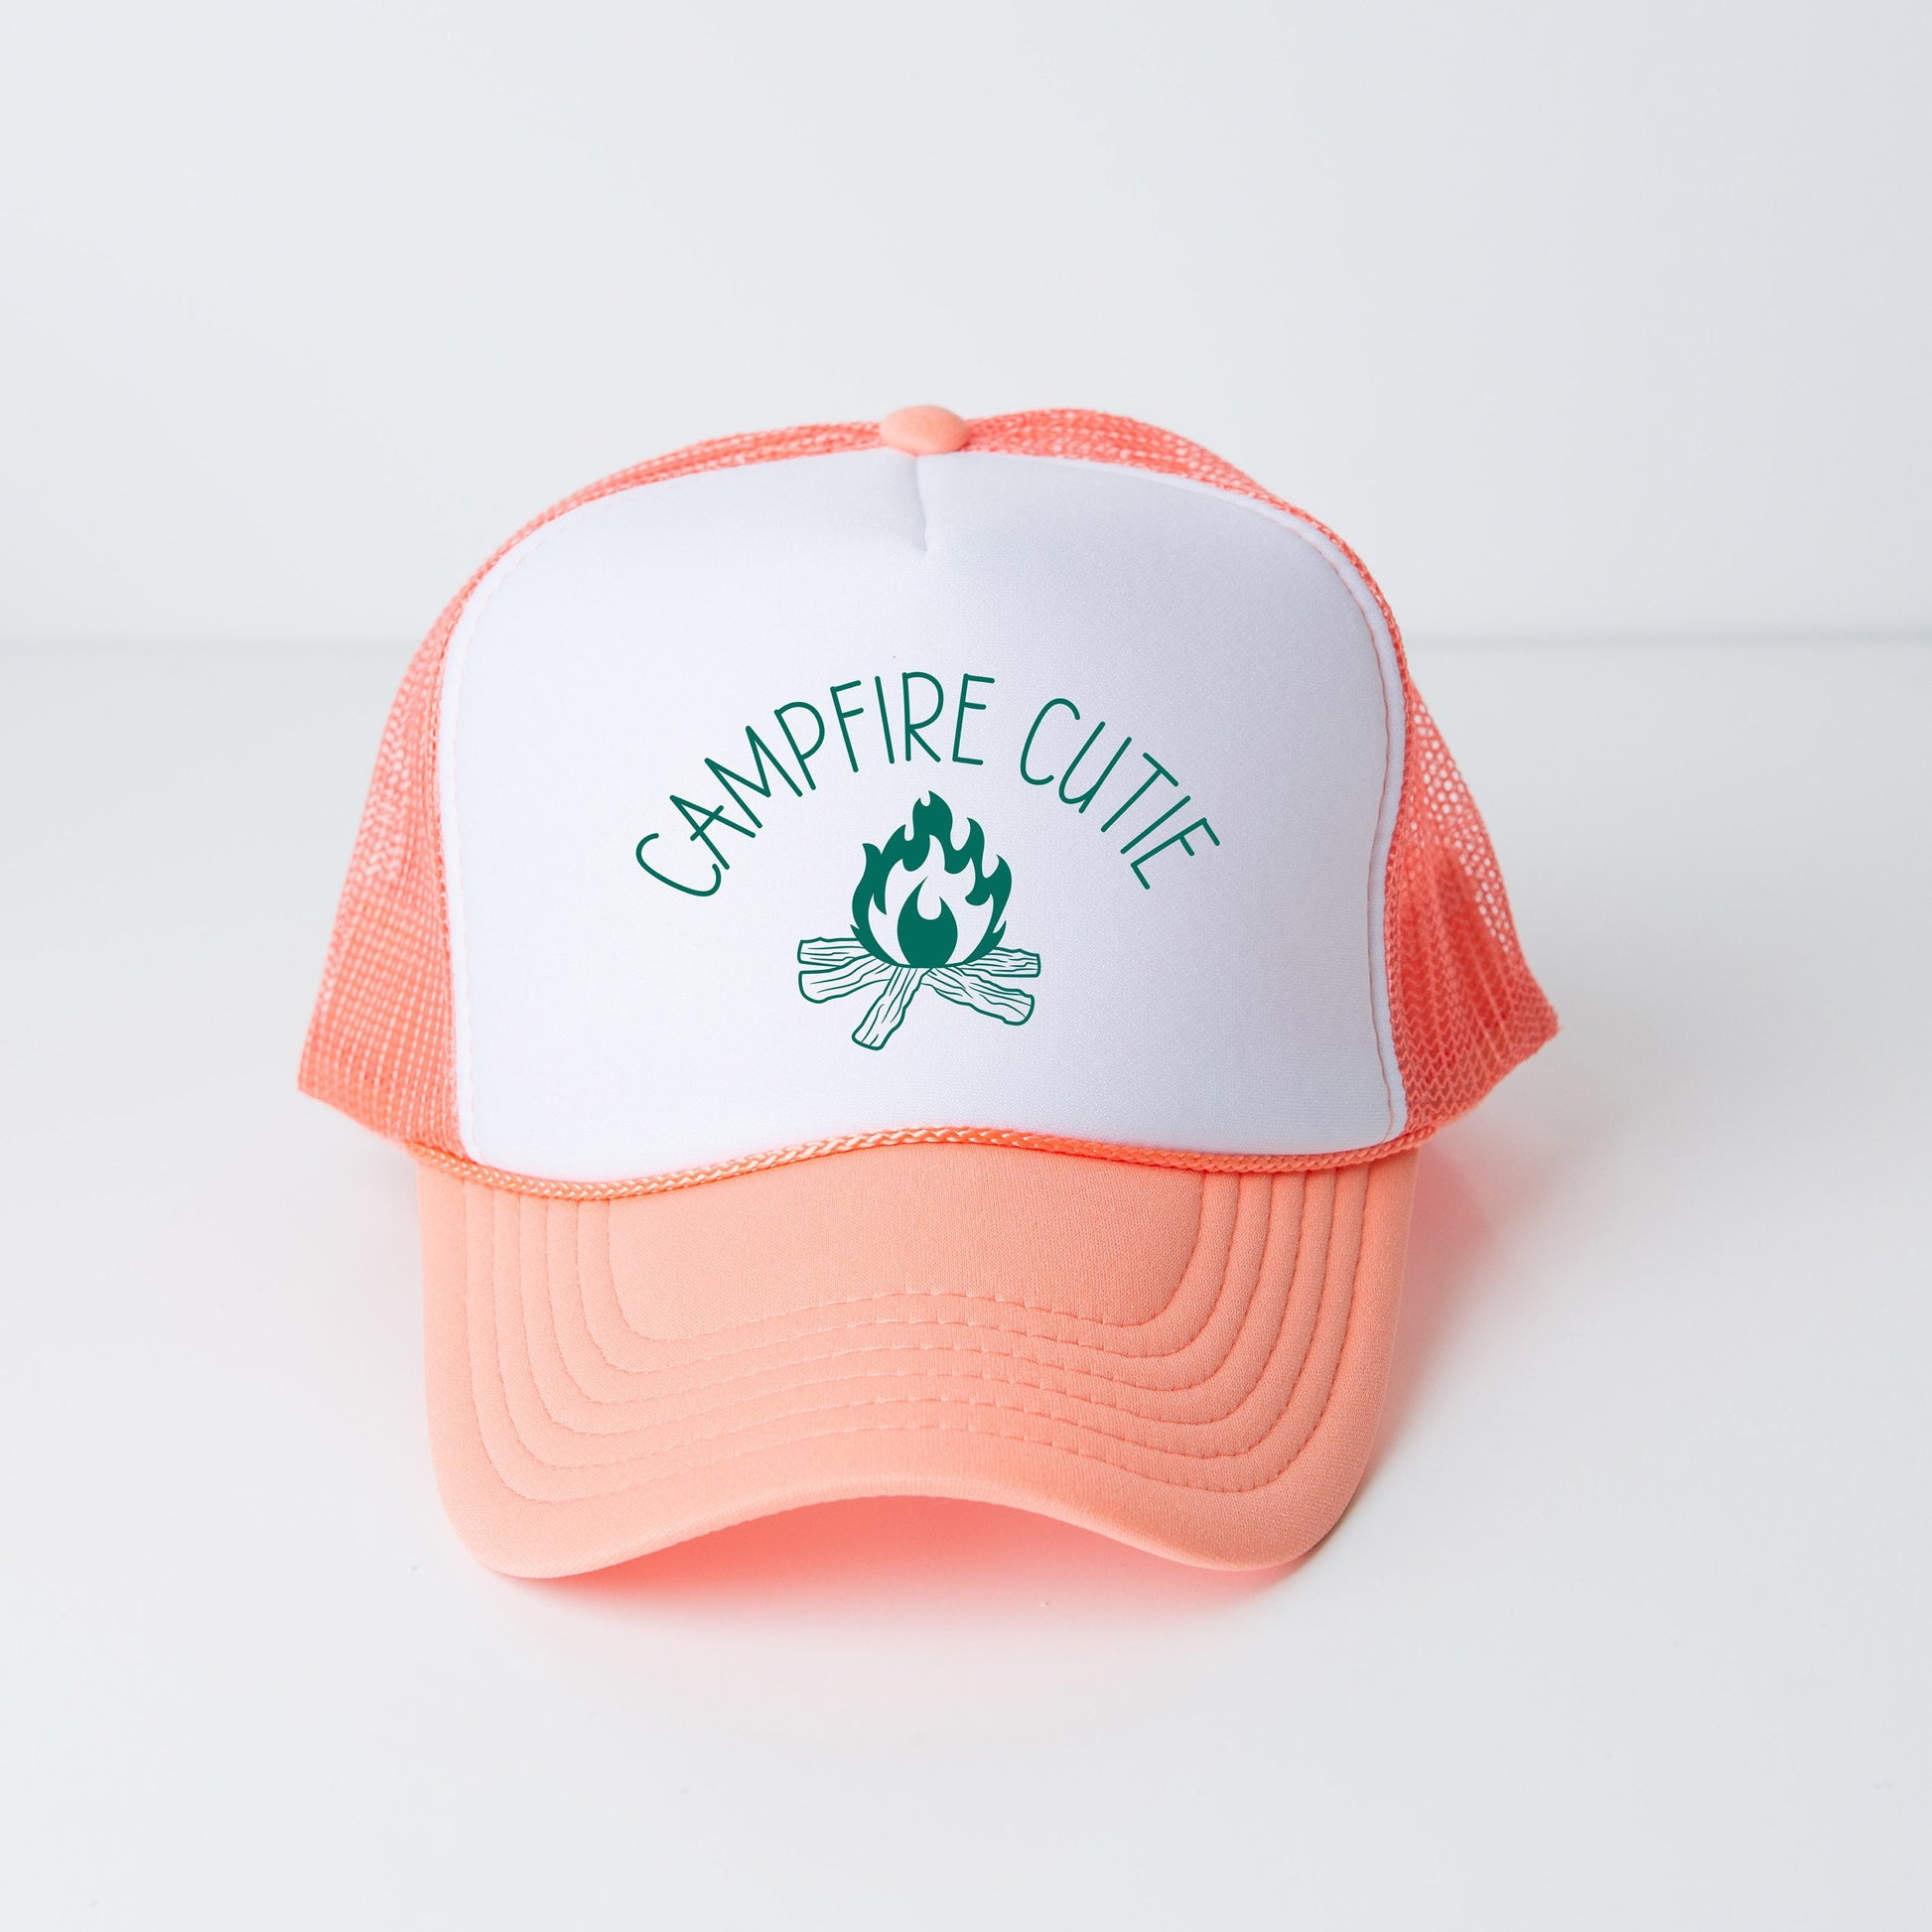 a pink and white trucker hat with a campfire cute logo